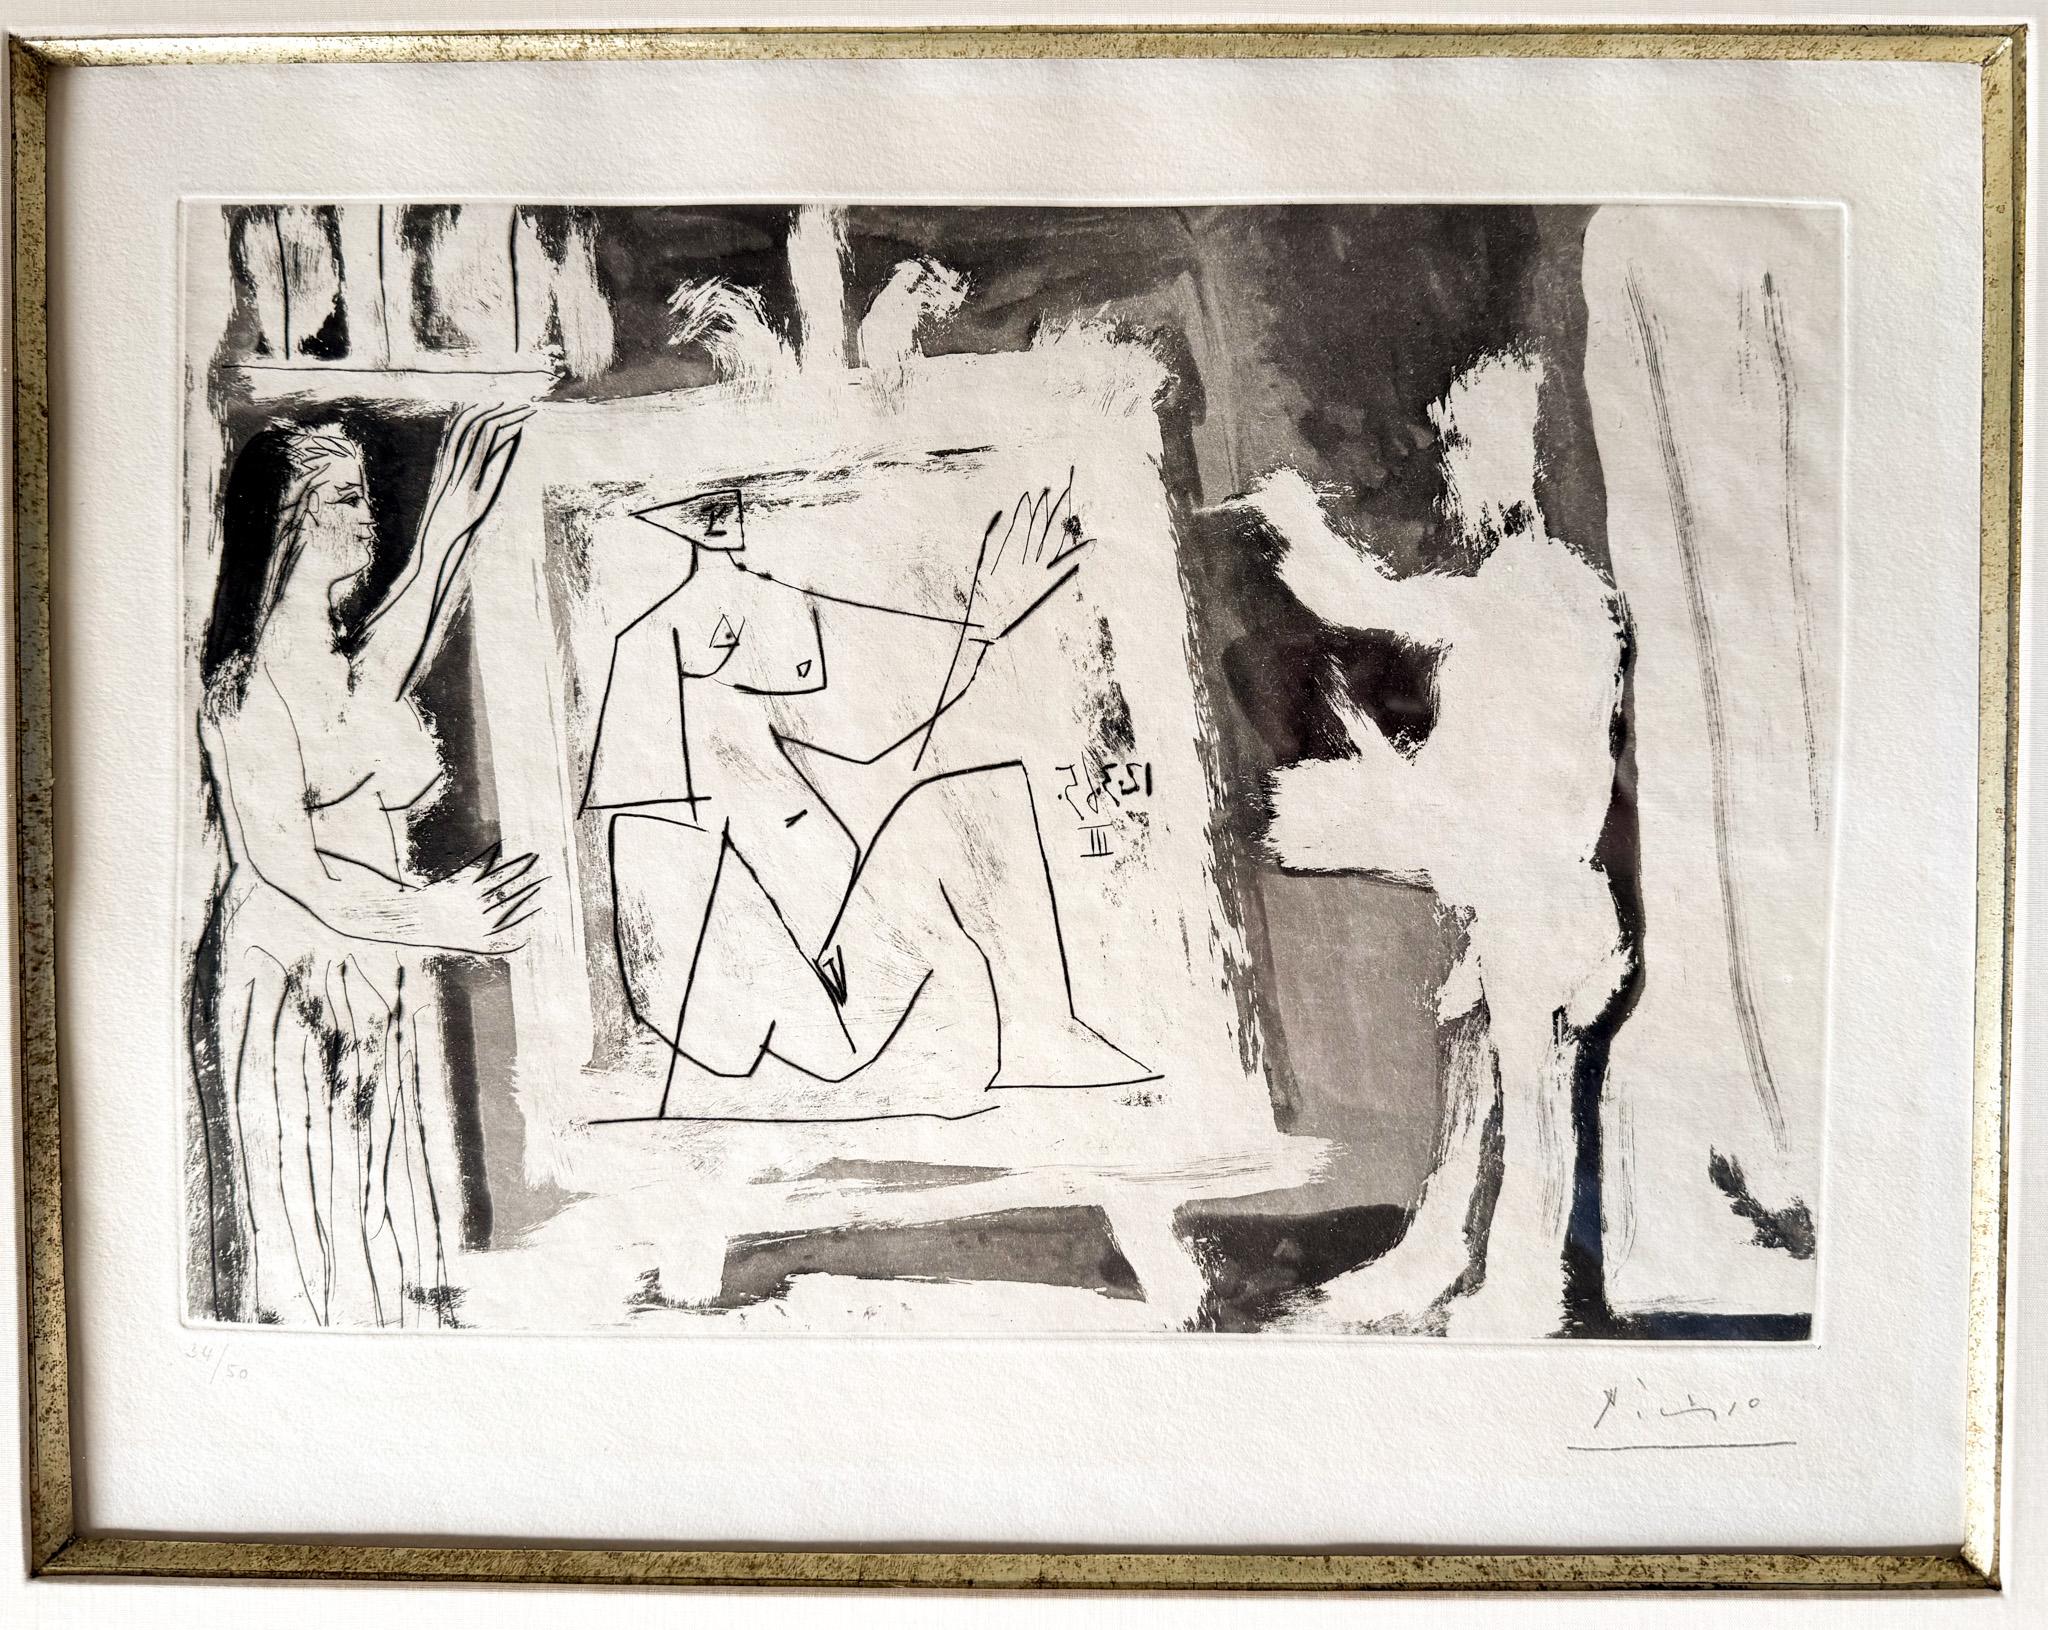 Aquatint and drypoint etching by Pablo Picasso titled “Dans l’Atelier III,” executed in 1965. Number 34 from an edition of 50. Signed l/r Picasso, numbered lower left. In a custom gilt-edged gesso frame under glass.

Since Picasso first took to the